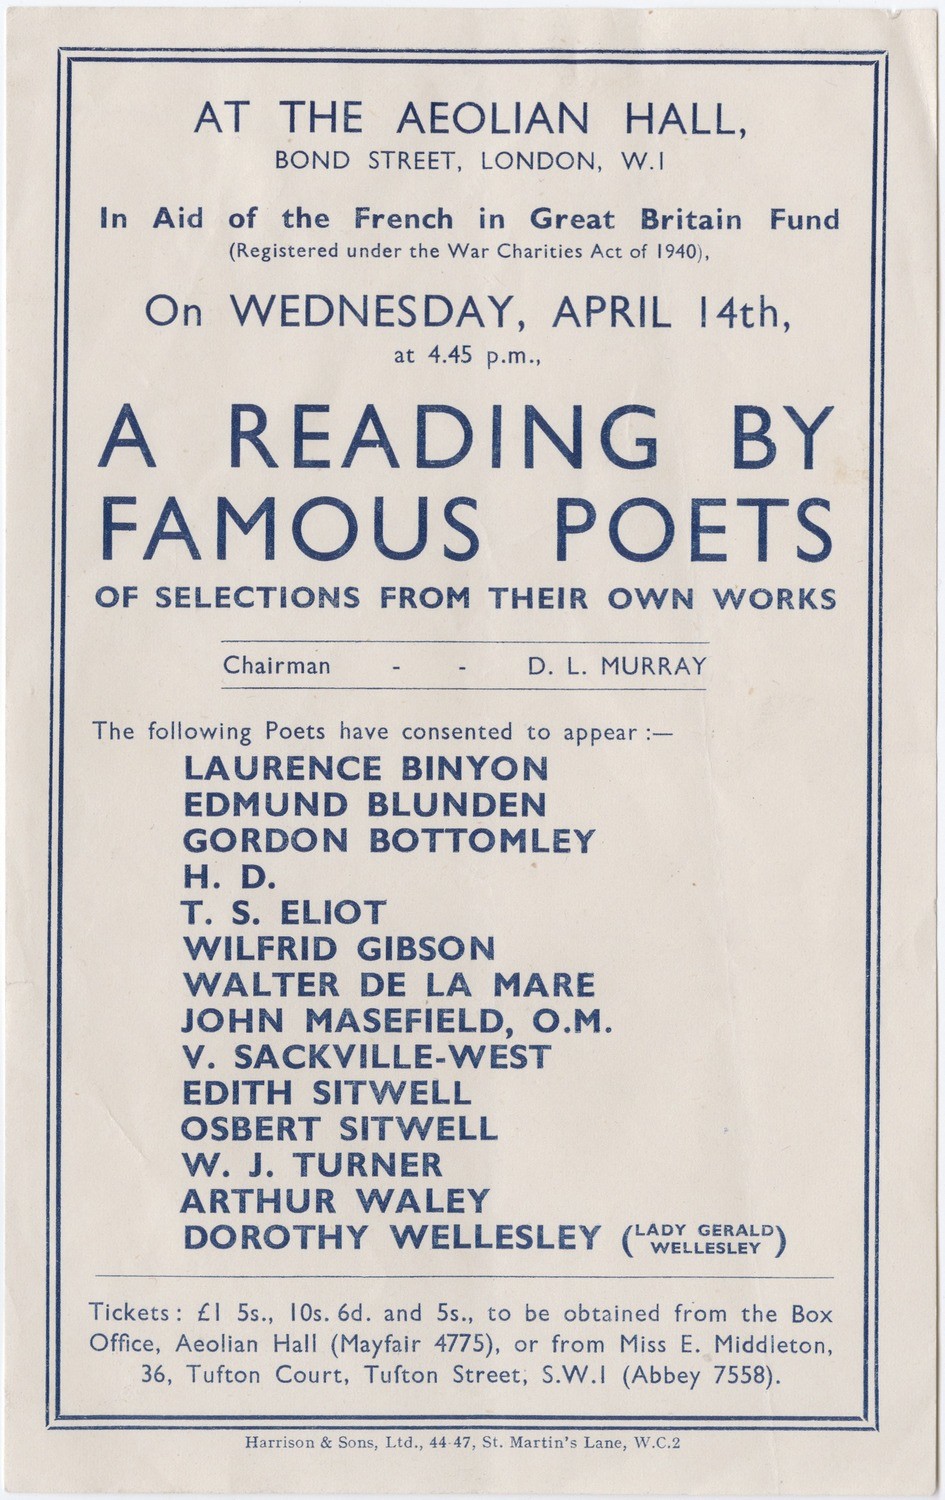 A reading by famous poets of selections from their own works.